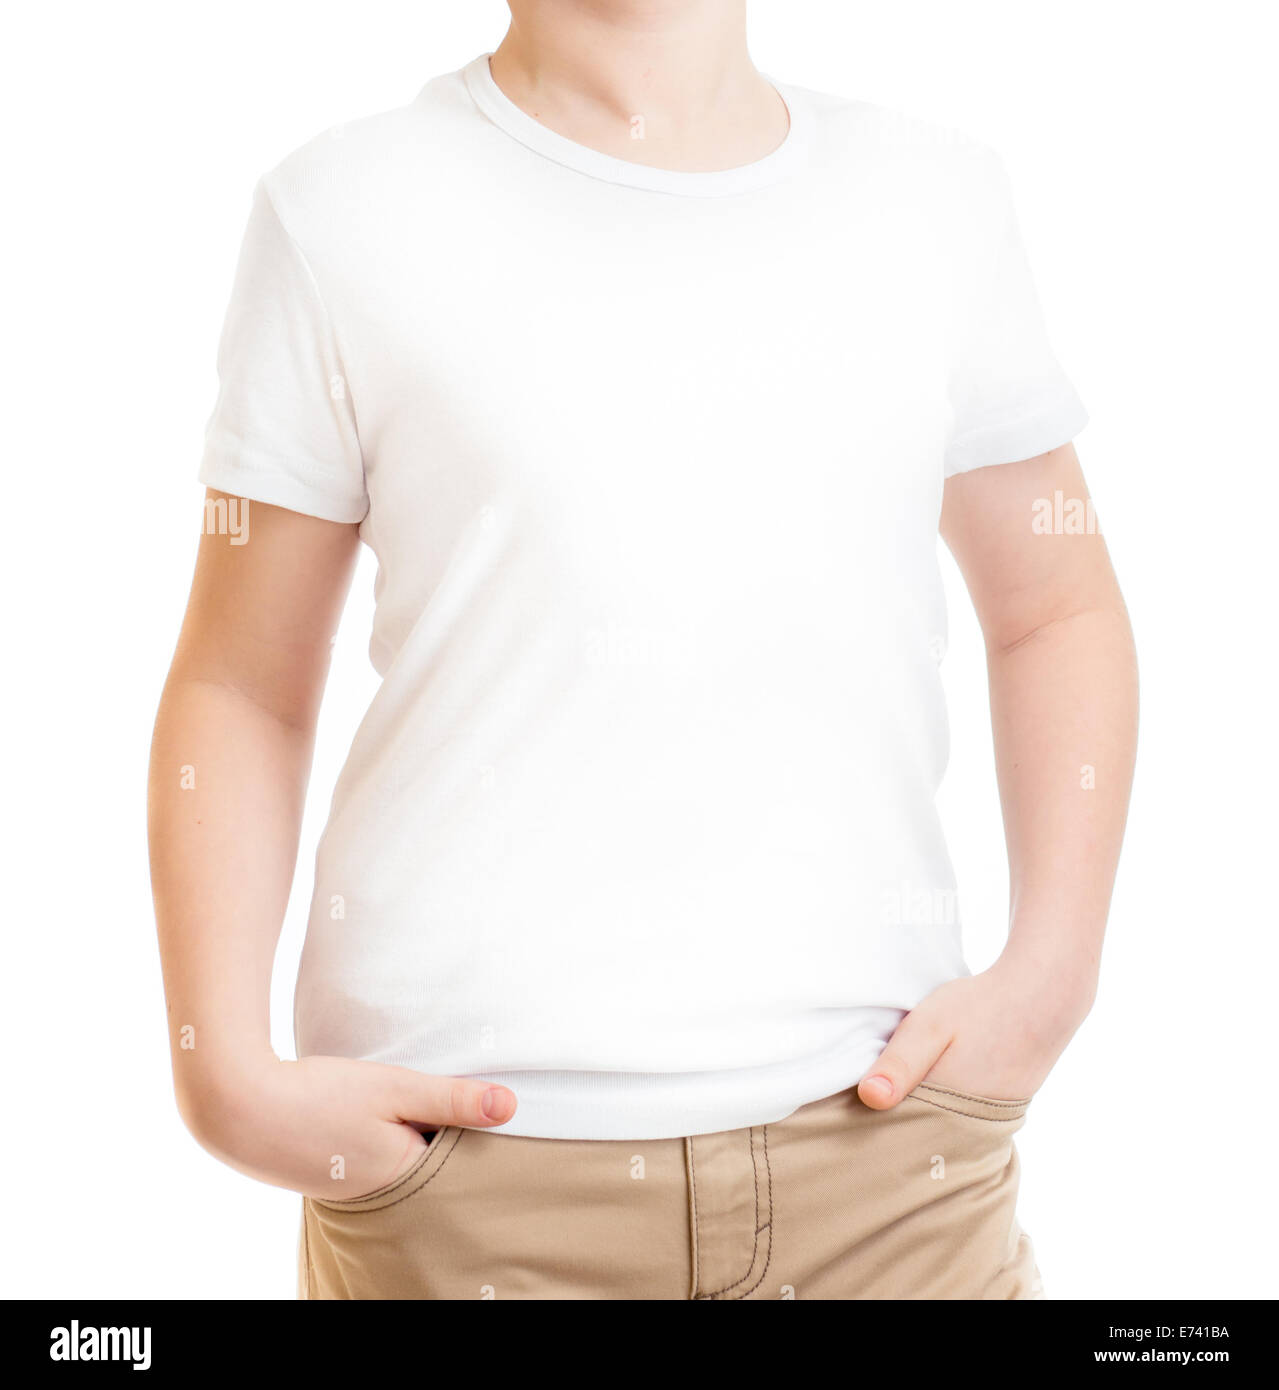 cropped model kid in t-shirt or tshirt isolated on white Stock Photo